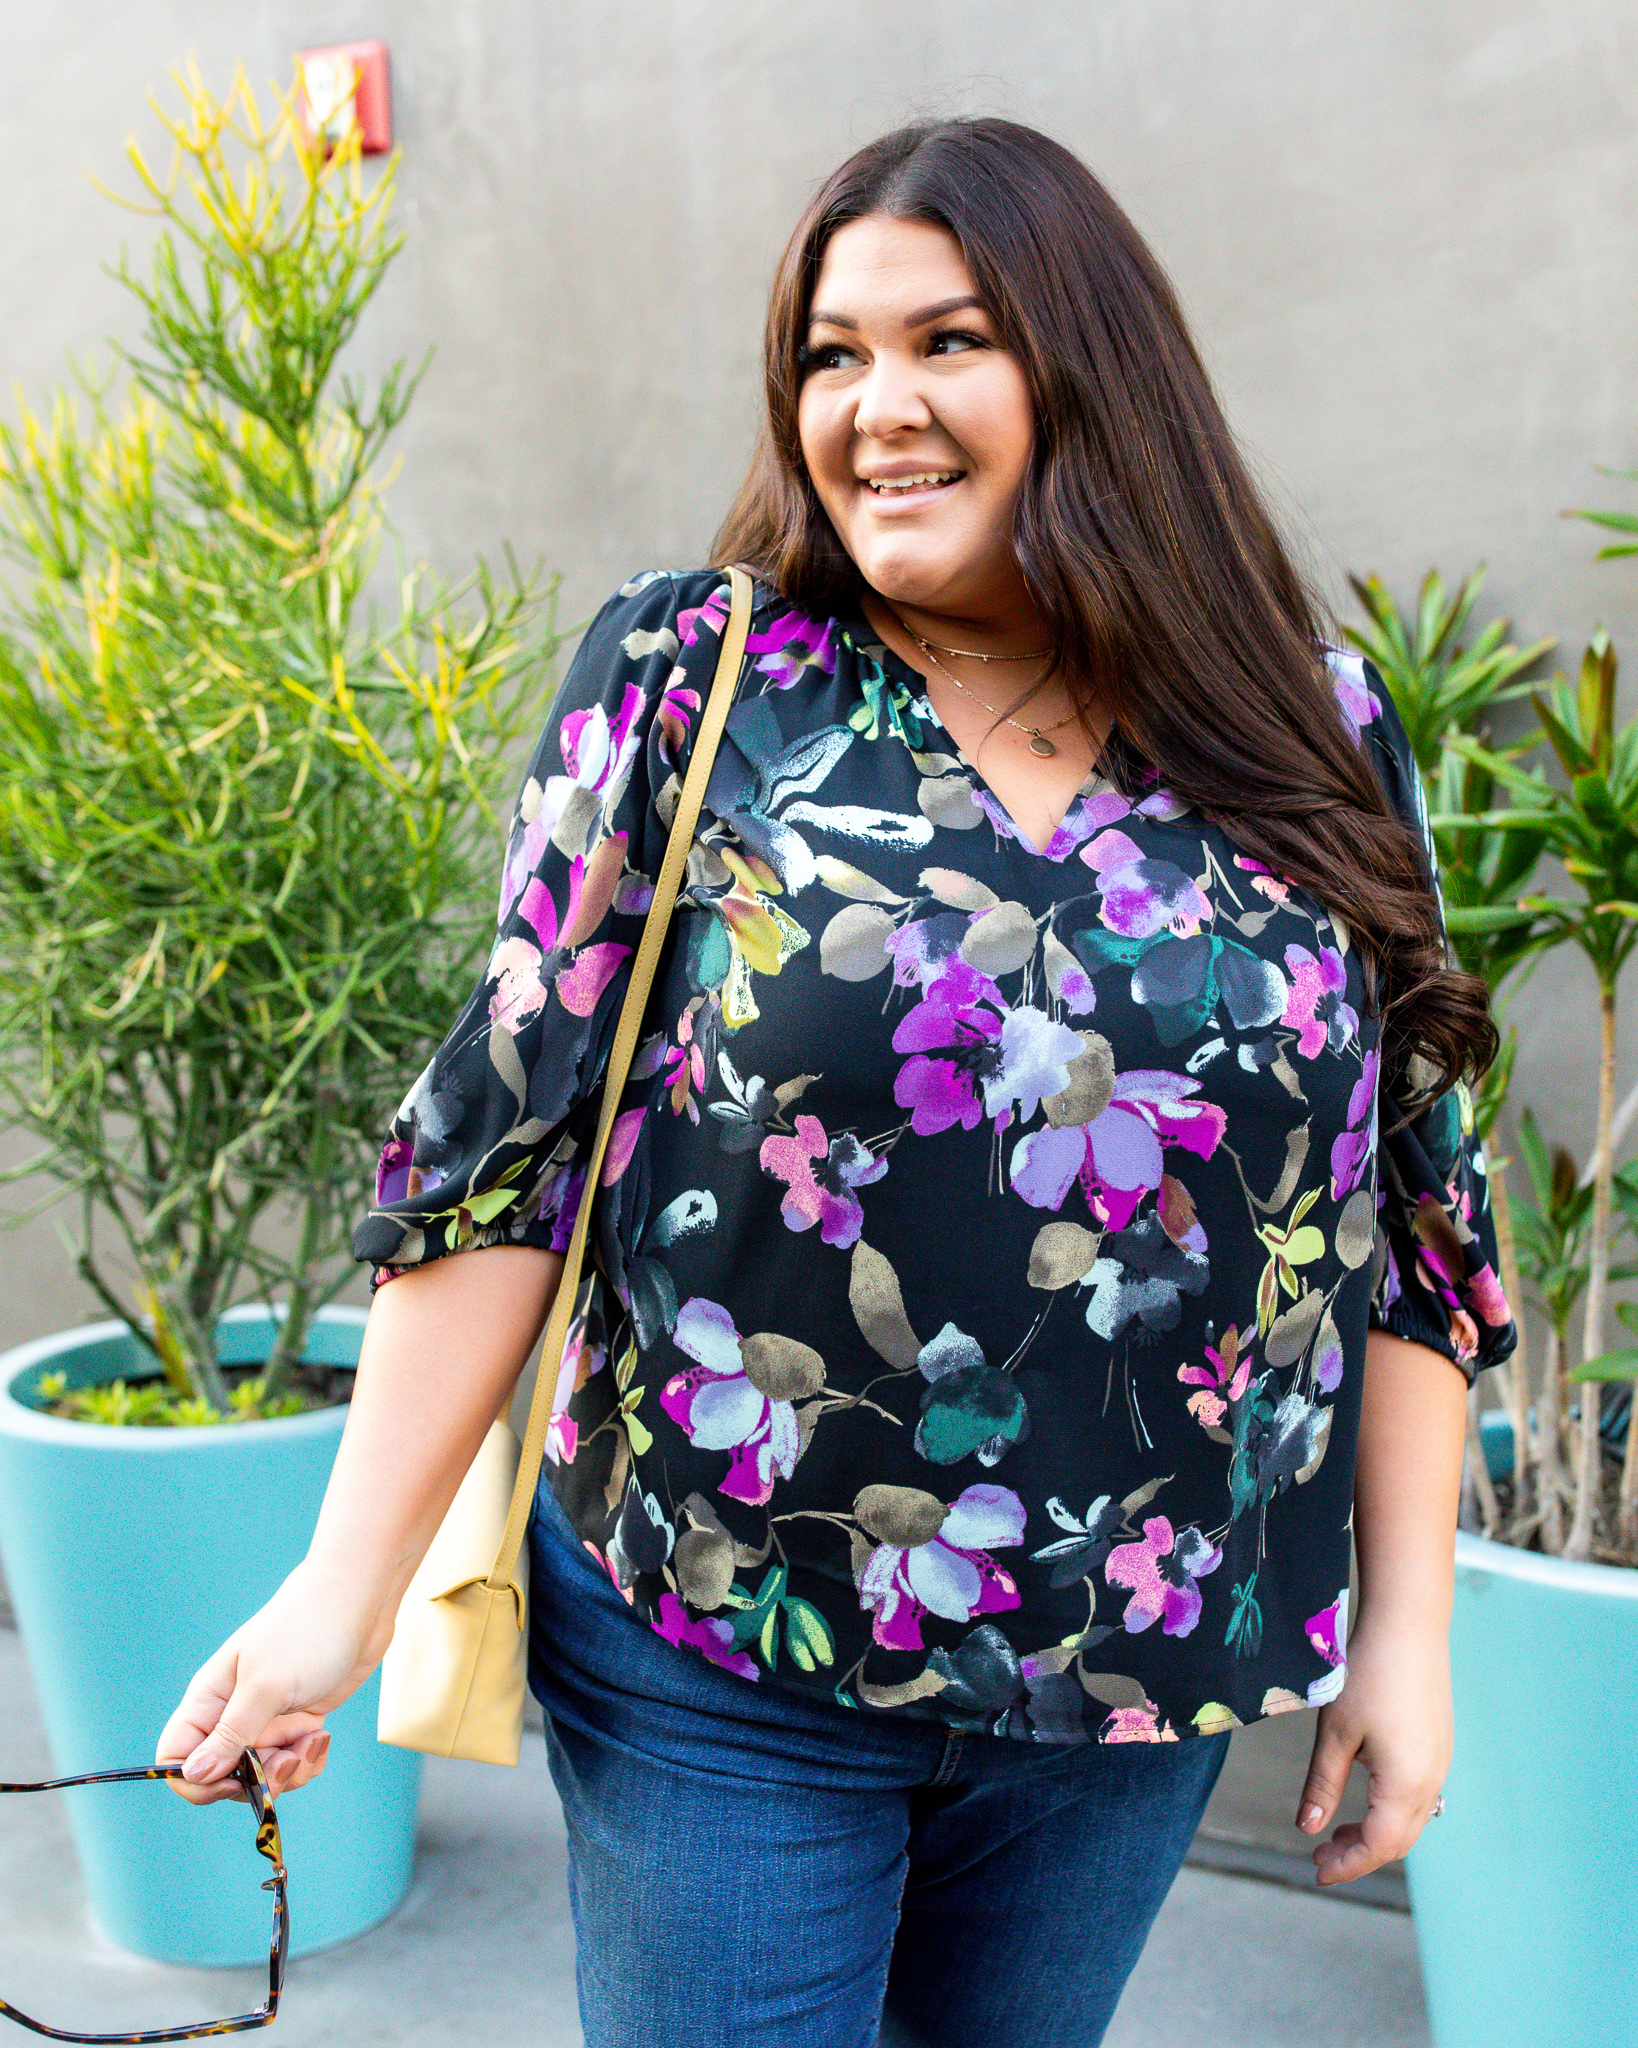 A destination for fashion ! Feel fresh with our newly launched Collection! # LASTINCH #MadeForCurves #plussizeclothing …